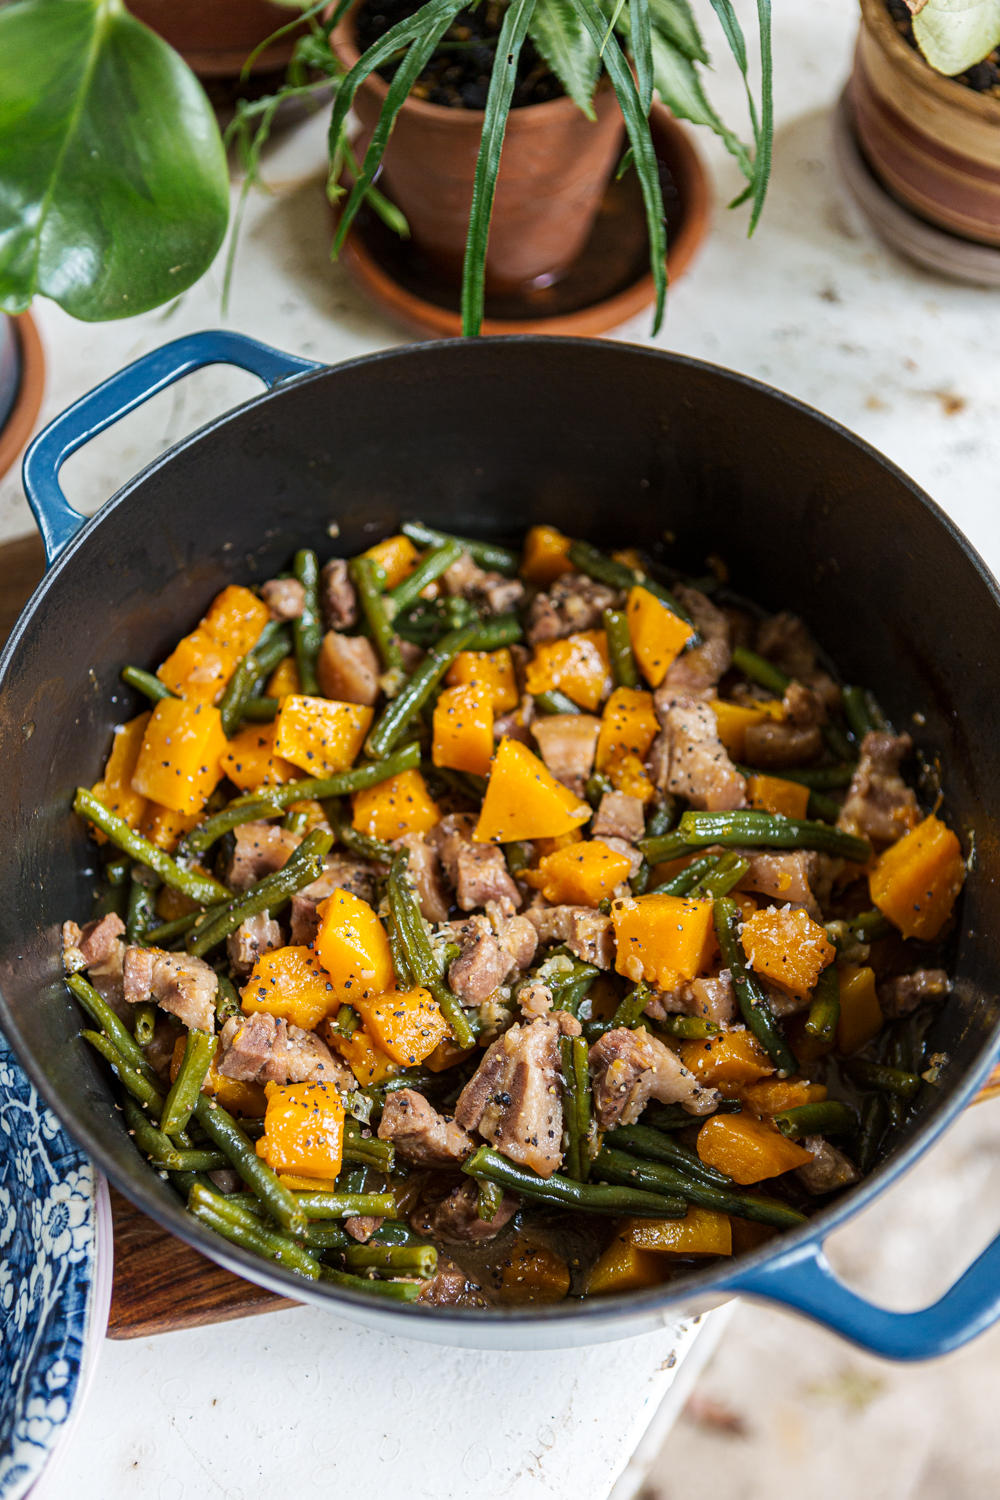 Pork belly, Pumpkin & Beans, Simple Healing Food by Quirky Cooking